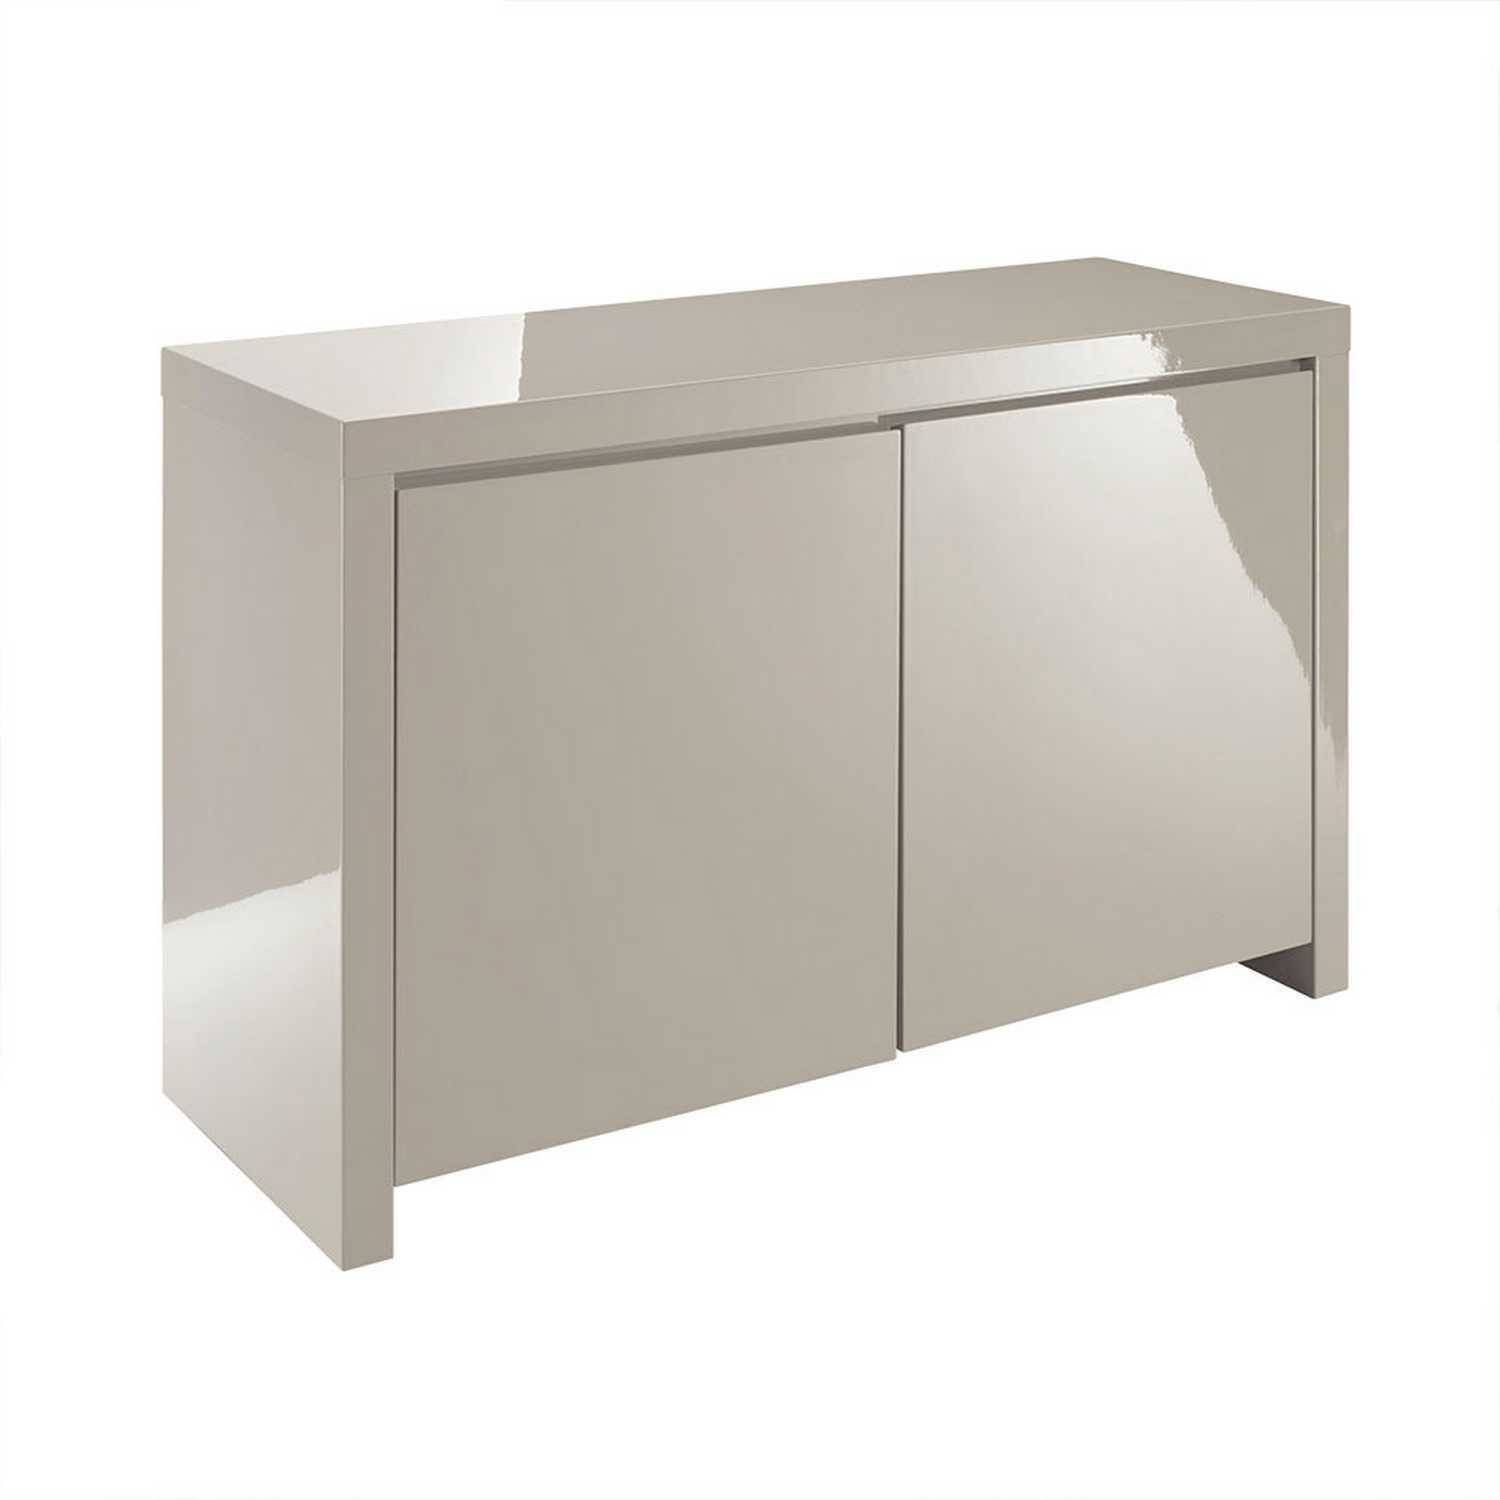 Puro Sideboard Throughout Best And Newest Cream Gloss Sideboards (View 2 of 15)